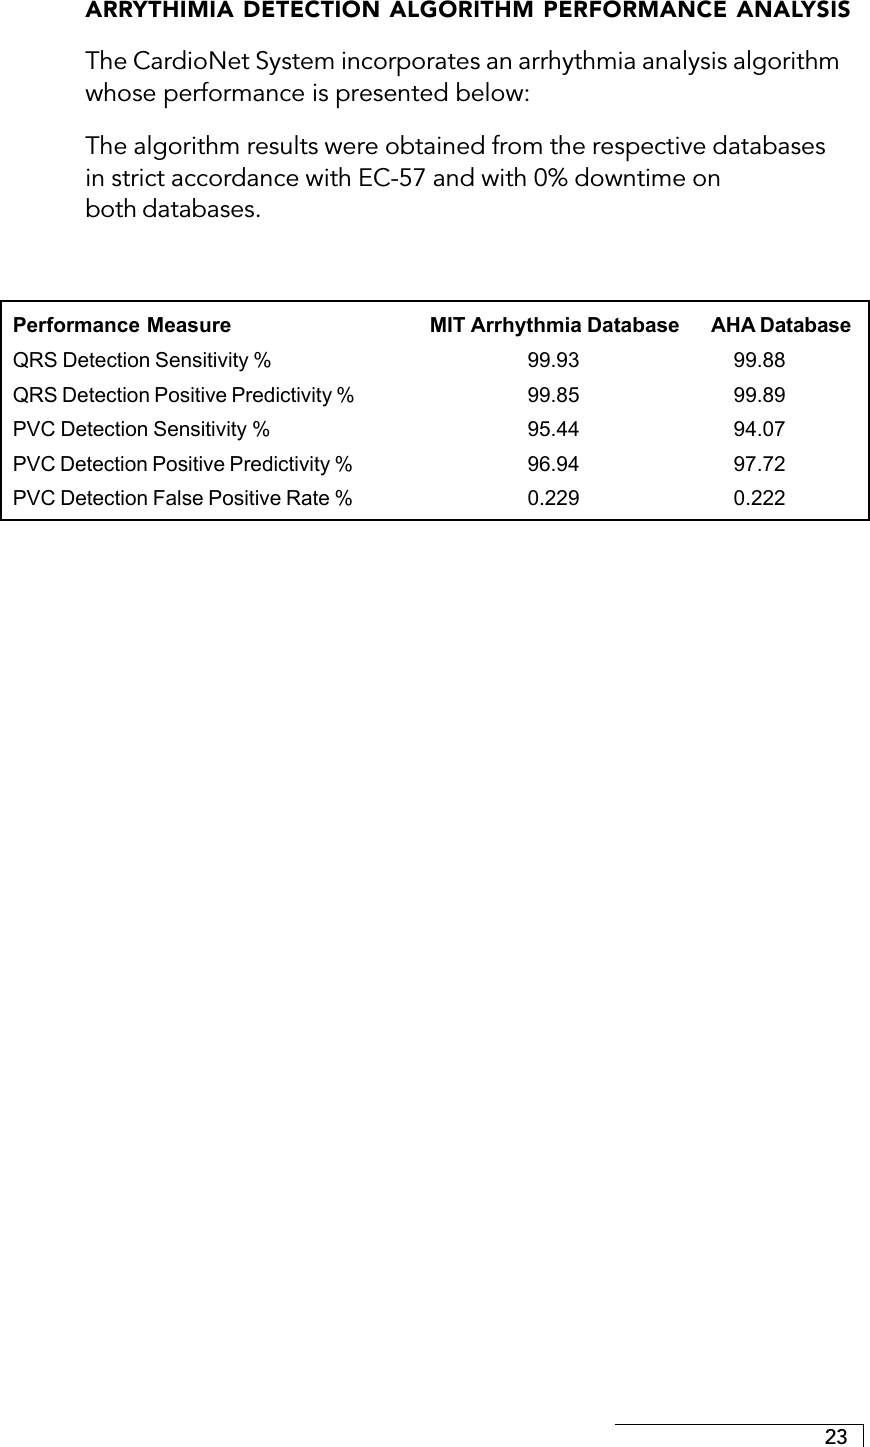 23ARRYTHIMIA DETECTION ALGORITHM PERFORMANCE ANALYSISThe CardioNet System incorporates an arrhythmia analysis algorithmwhose performance is presented below:The algorithm results were obtained from the respective databasesin strict accordance with EC-57 and with 0% downtime onboth databases.Performance Measure MIT Arrhythmia Database AHA DatabaseQRS Detection Sensitivity %                 99.93     99.88QRS Detection Positive Predictivity %                 99.85     99.89PVC Detection Sensitivity %                 95.44     94.07PVC Detection Positive Predictivity %                 96.94     97.72PVC Detection False Positive Rate %                 0.229     0.222